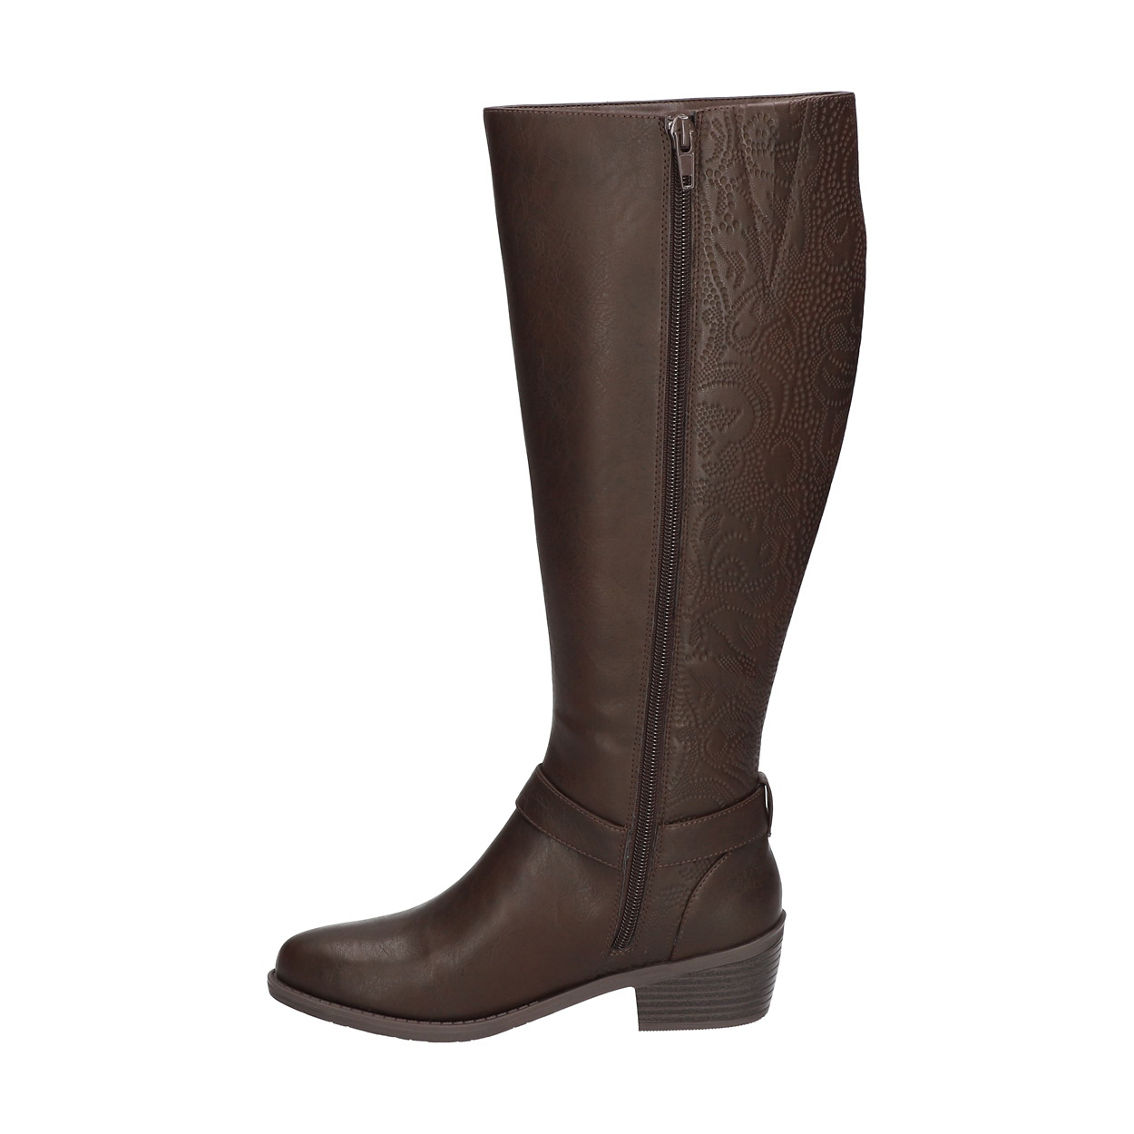 Luella Plus by Easy Street Wide Calf Boots - Image 5 of 5